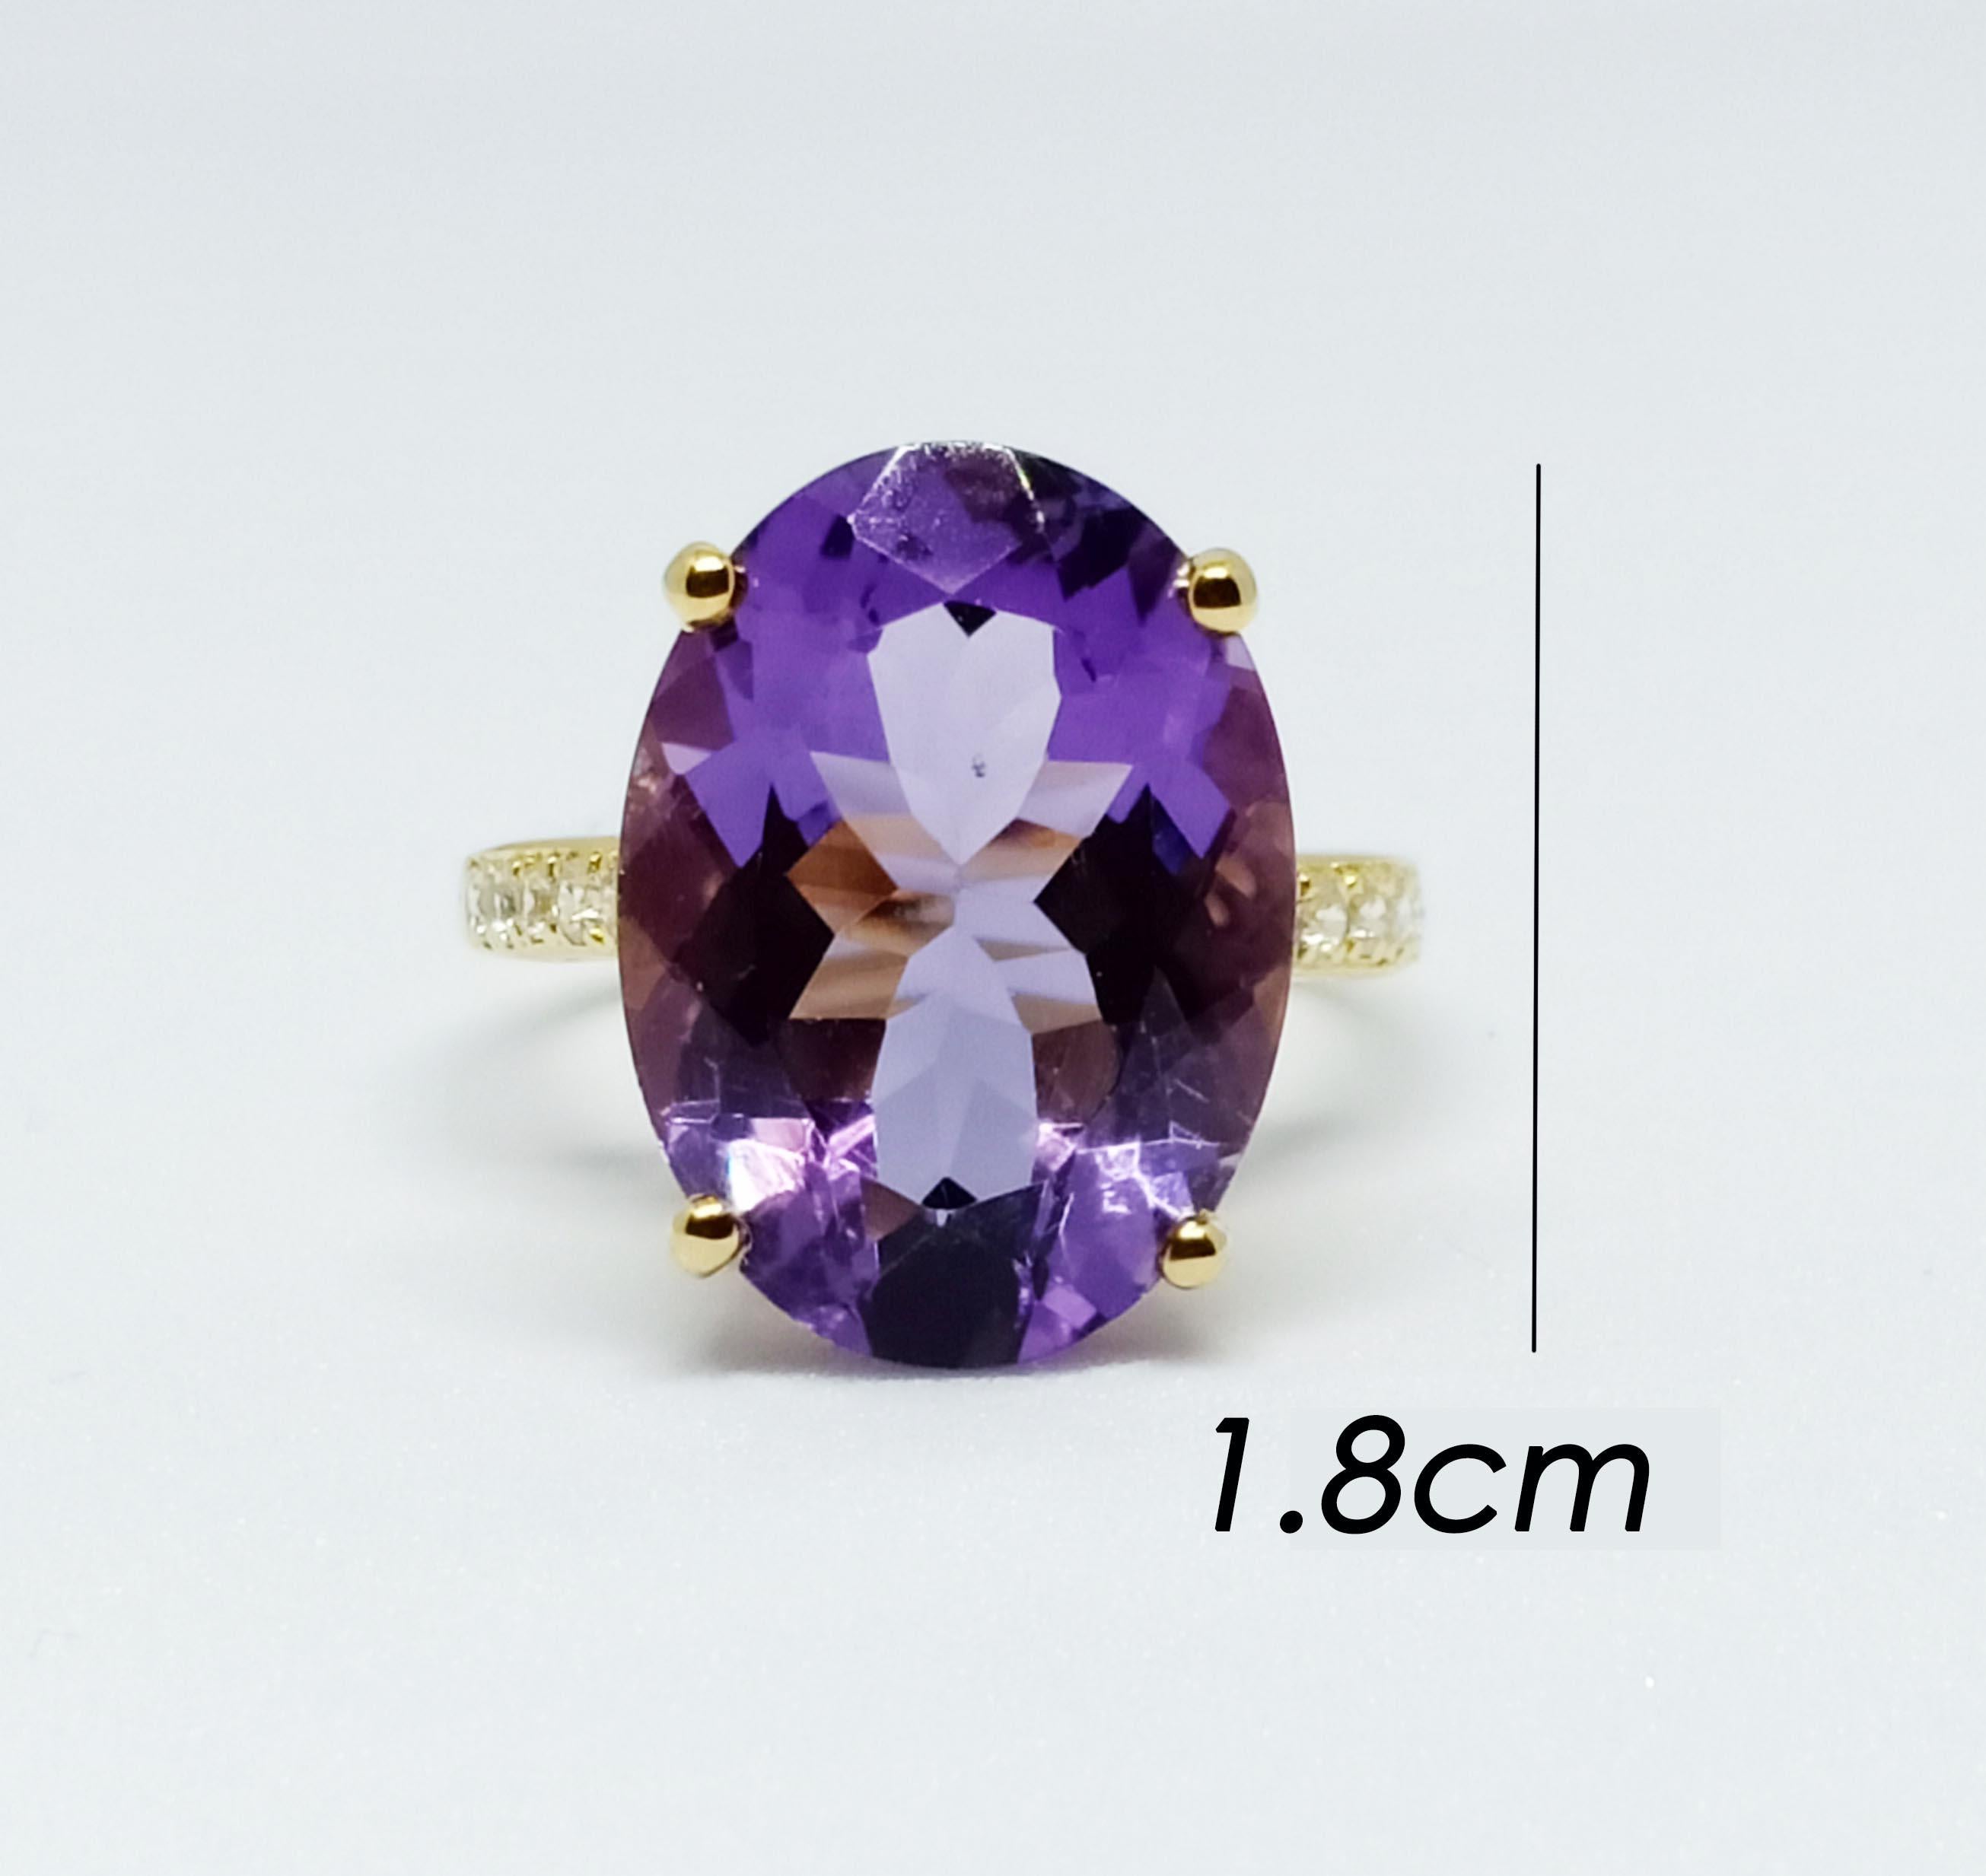 Amethyst oval 18x13 mm.  ( 11.24cts ) 1 pc.
White zircon round 1.75 mm. 11 pcs.
18k Gold plated over sterling silver
Size 8 us.
Can be smaller resizable free. take up 7 days before ship.

Storefront (search) ornamento jewellery